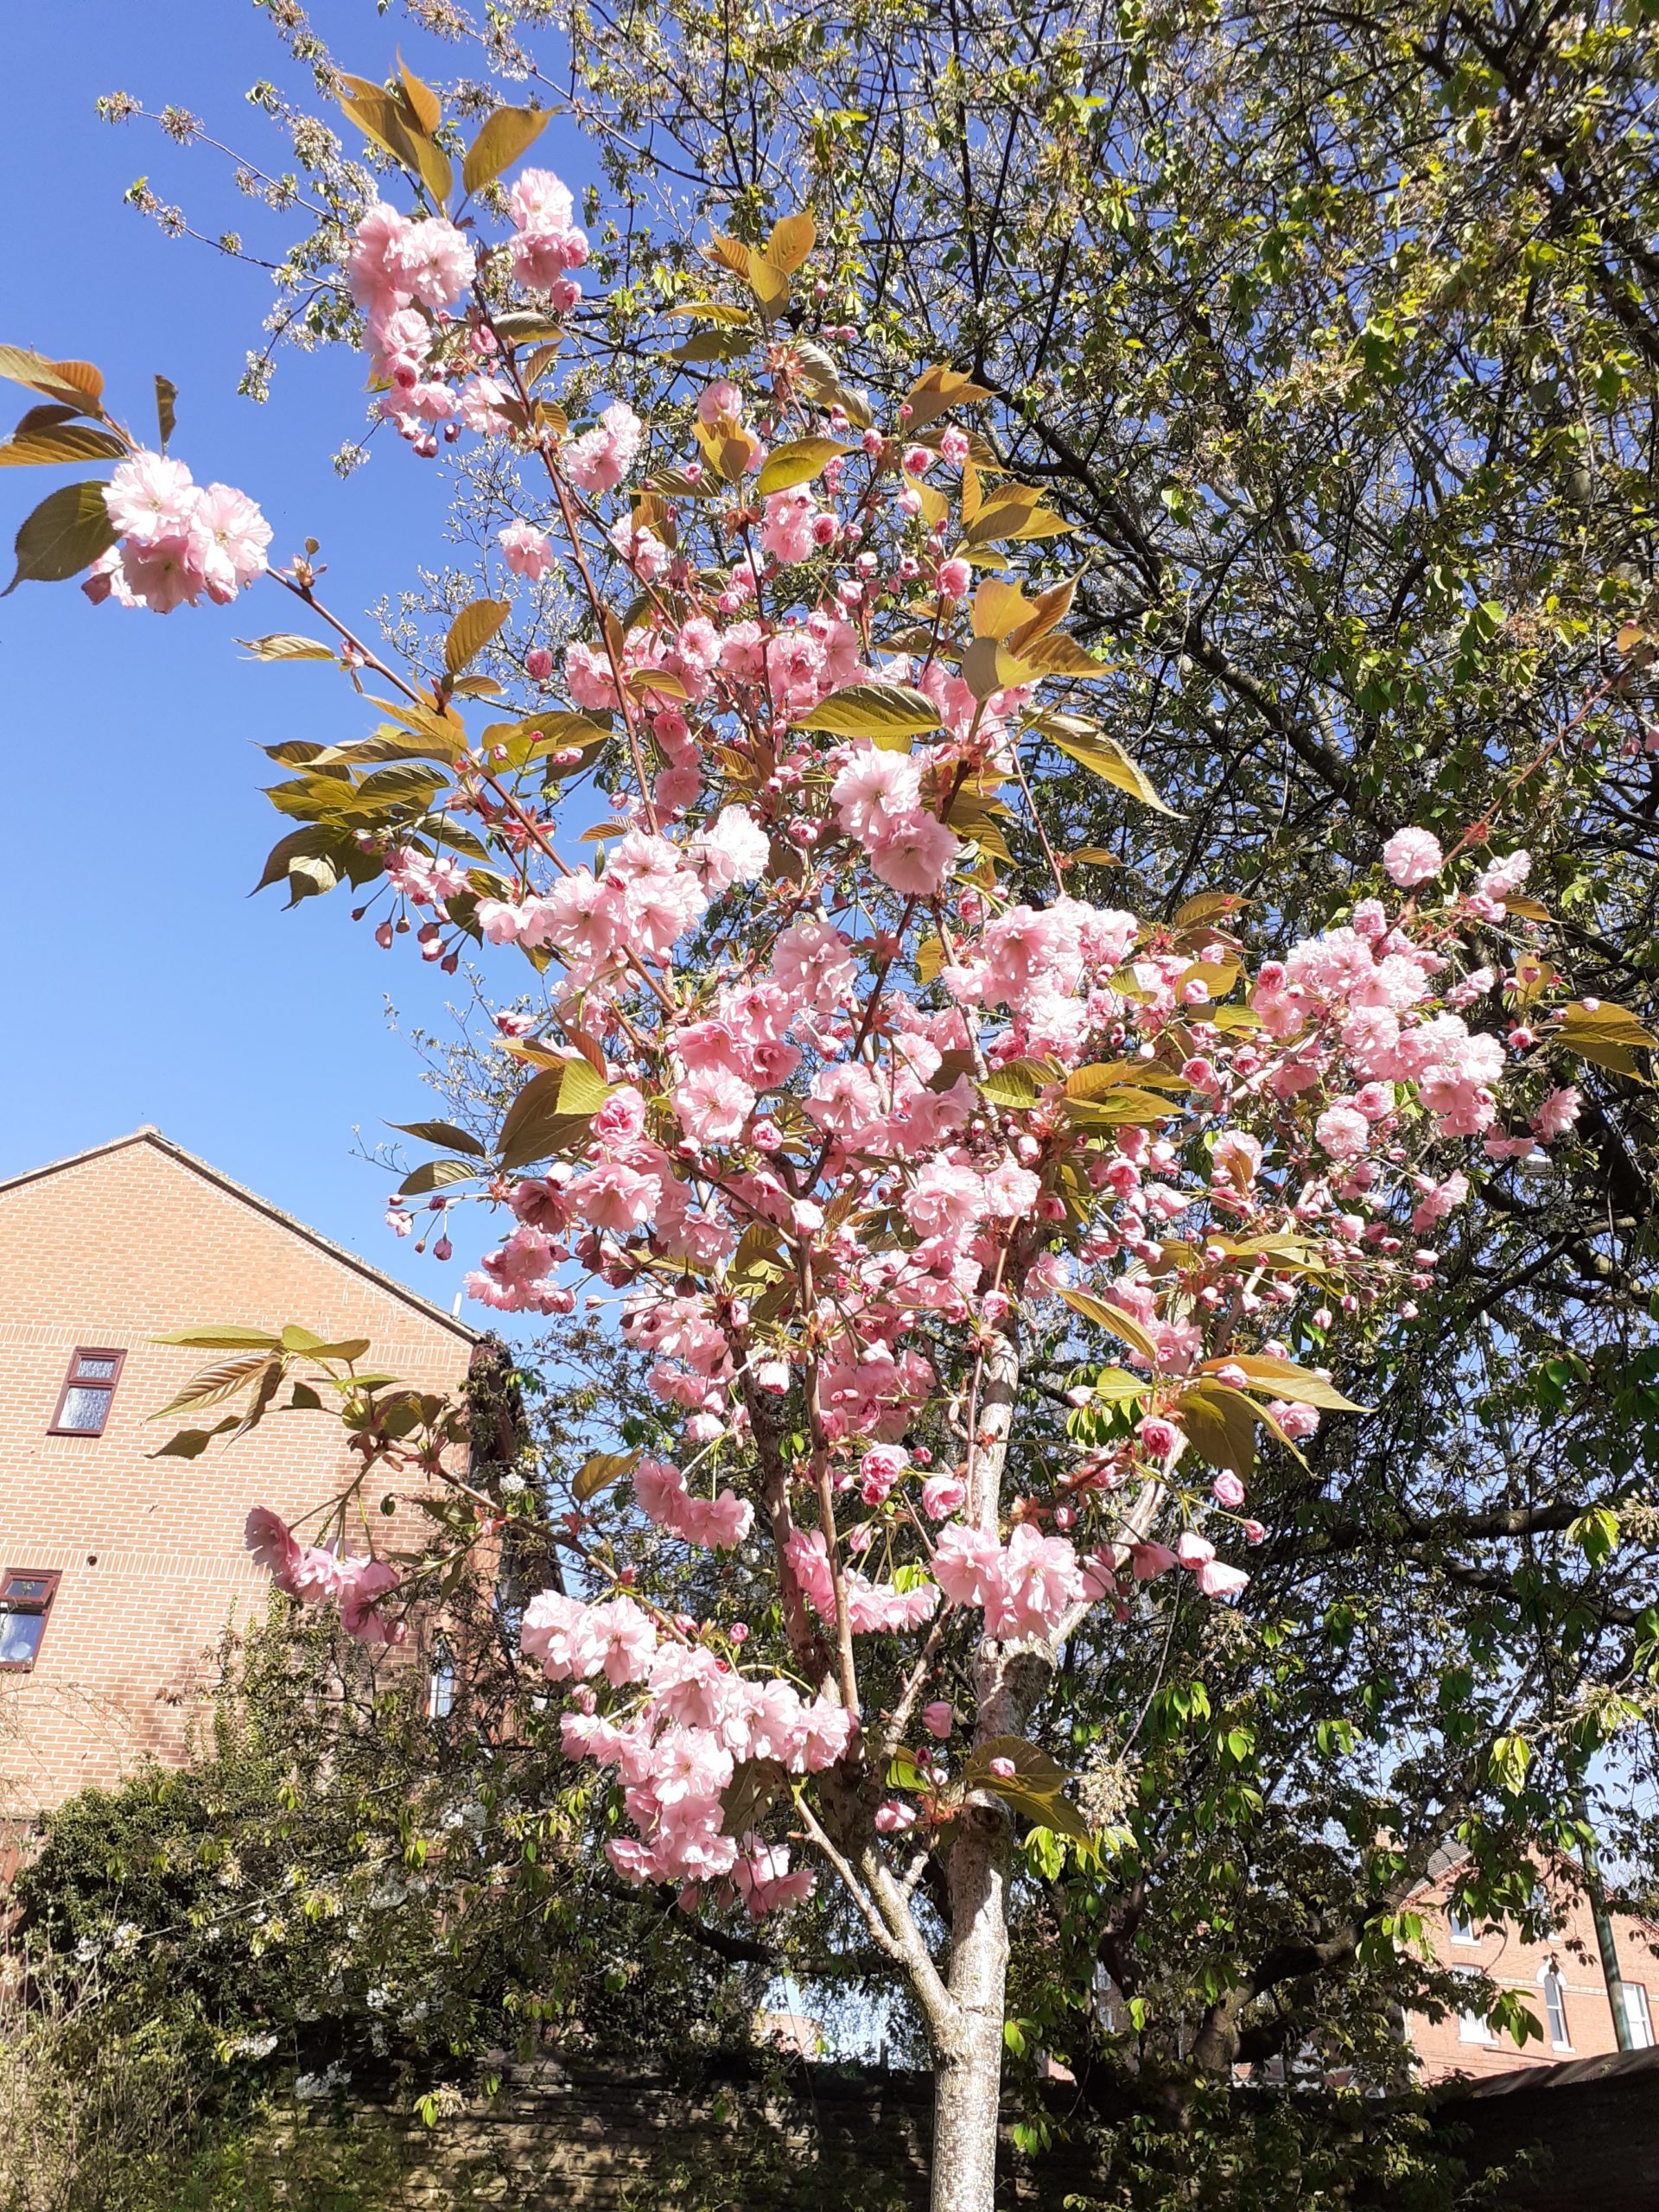 the young blossom tree with pink flowers and new leaves, sky and buildings and trees behind